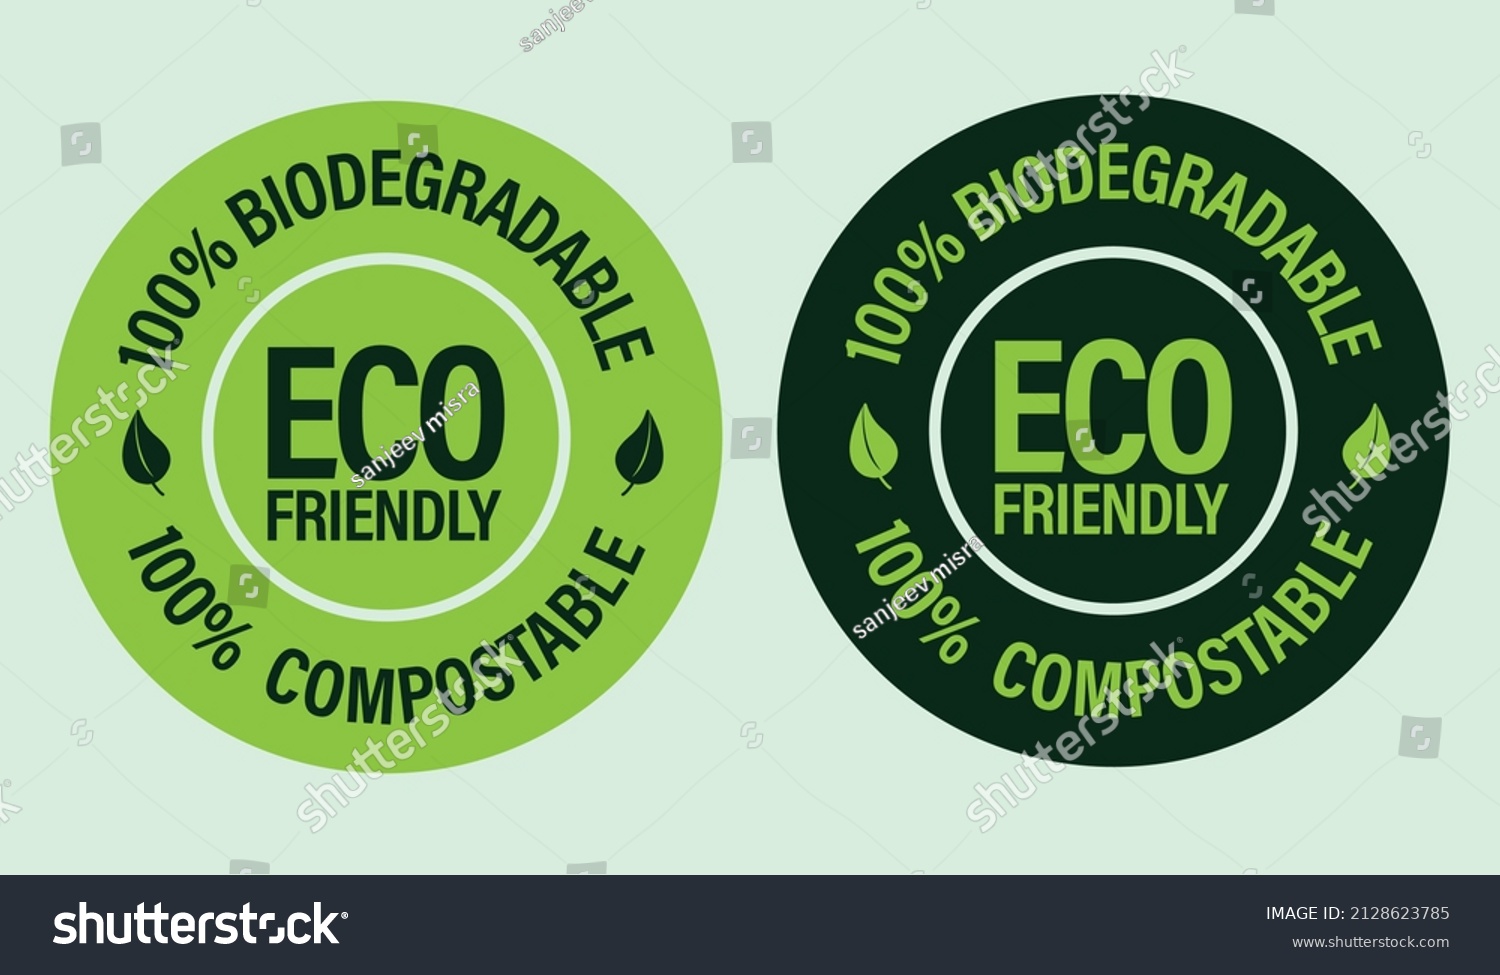 SVG of 100% biodegradable, 100% compostable vector icon, eco friendly abstract, green and black in color svg